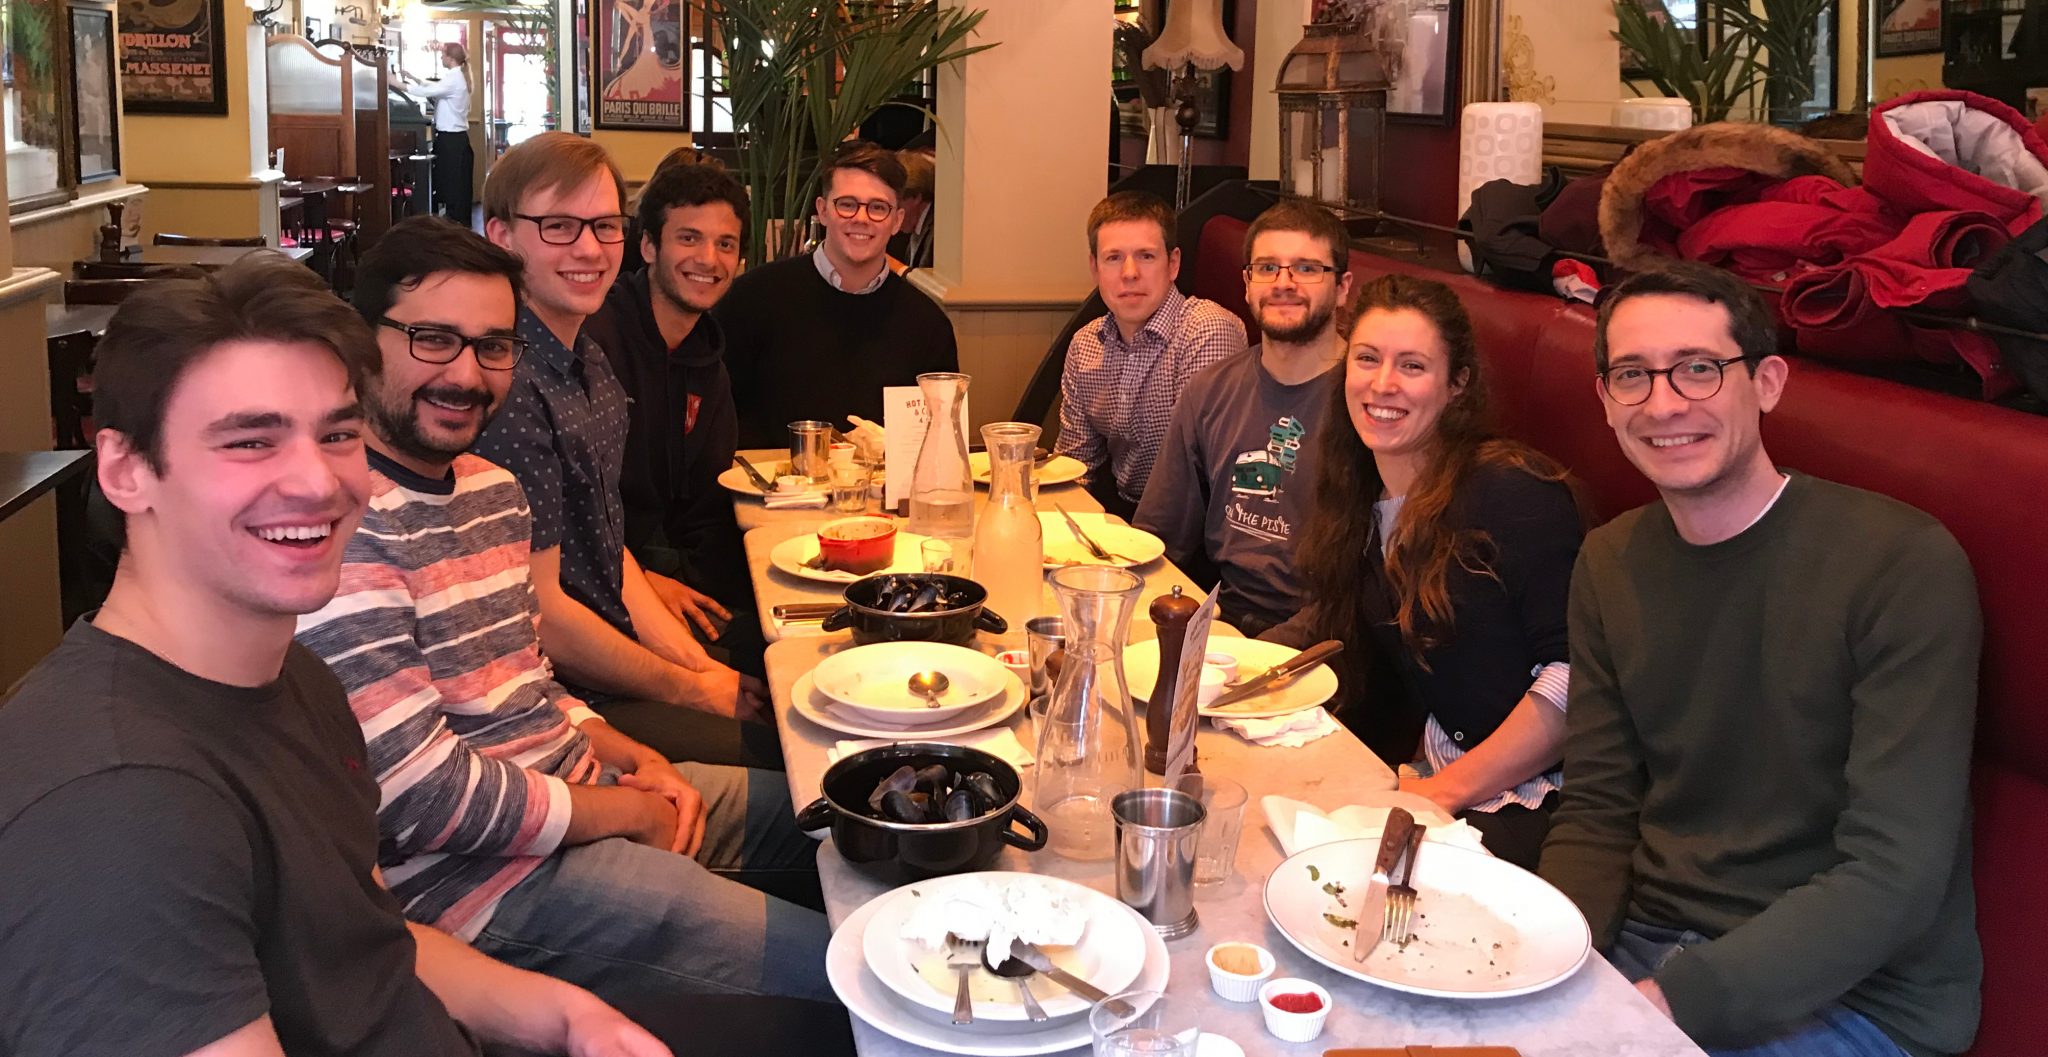 Group photo of Dynamic Robot Systems group having a meal in a restaurant